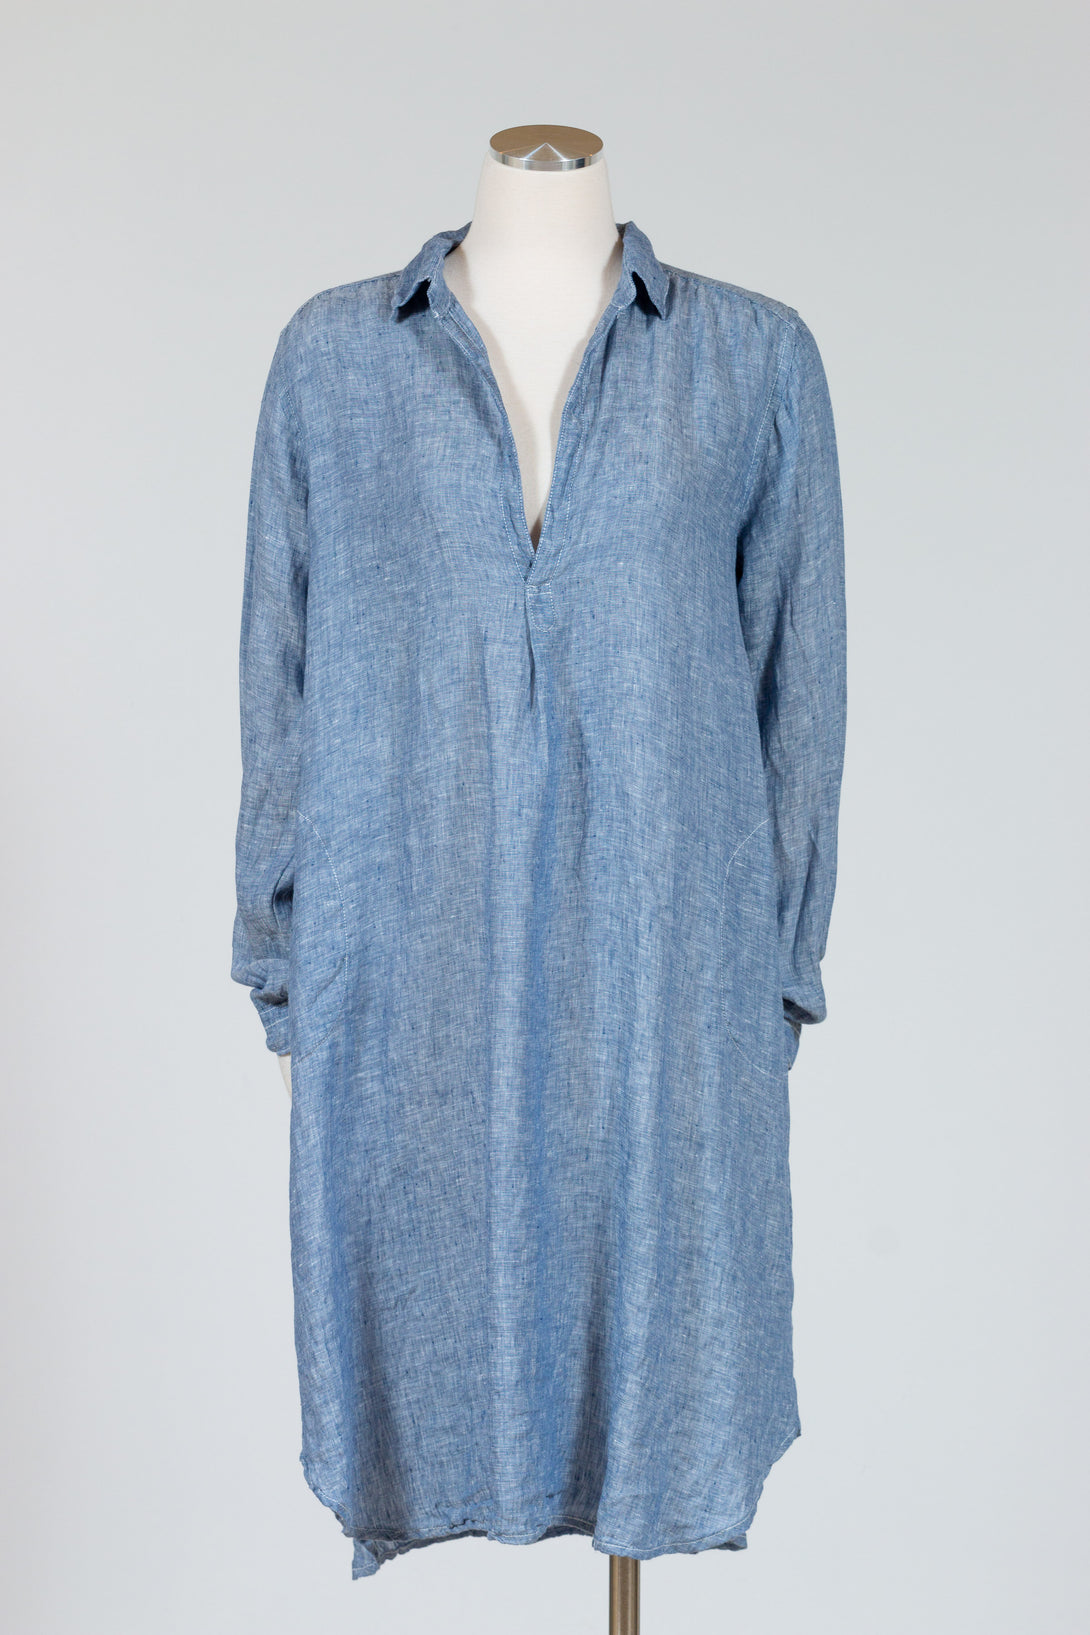 CP Shades Lara Dress is a long-sleeved, lightweight chambray linen and open v-neck artist smock style dress that is comfortable and stylish. 